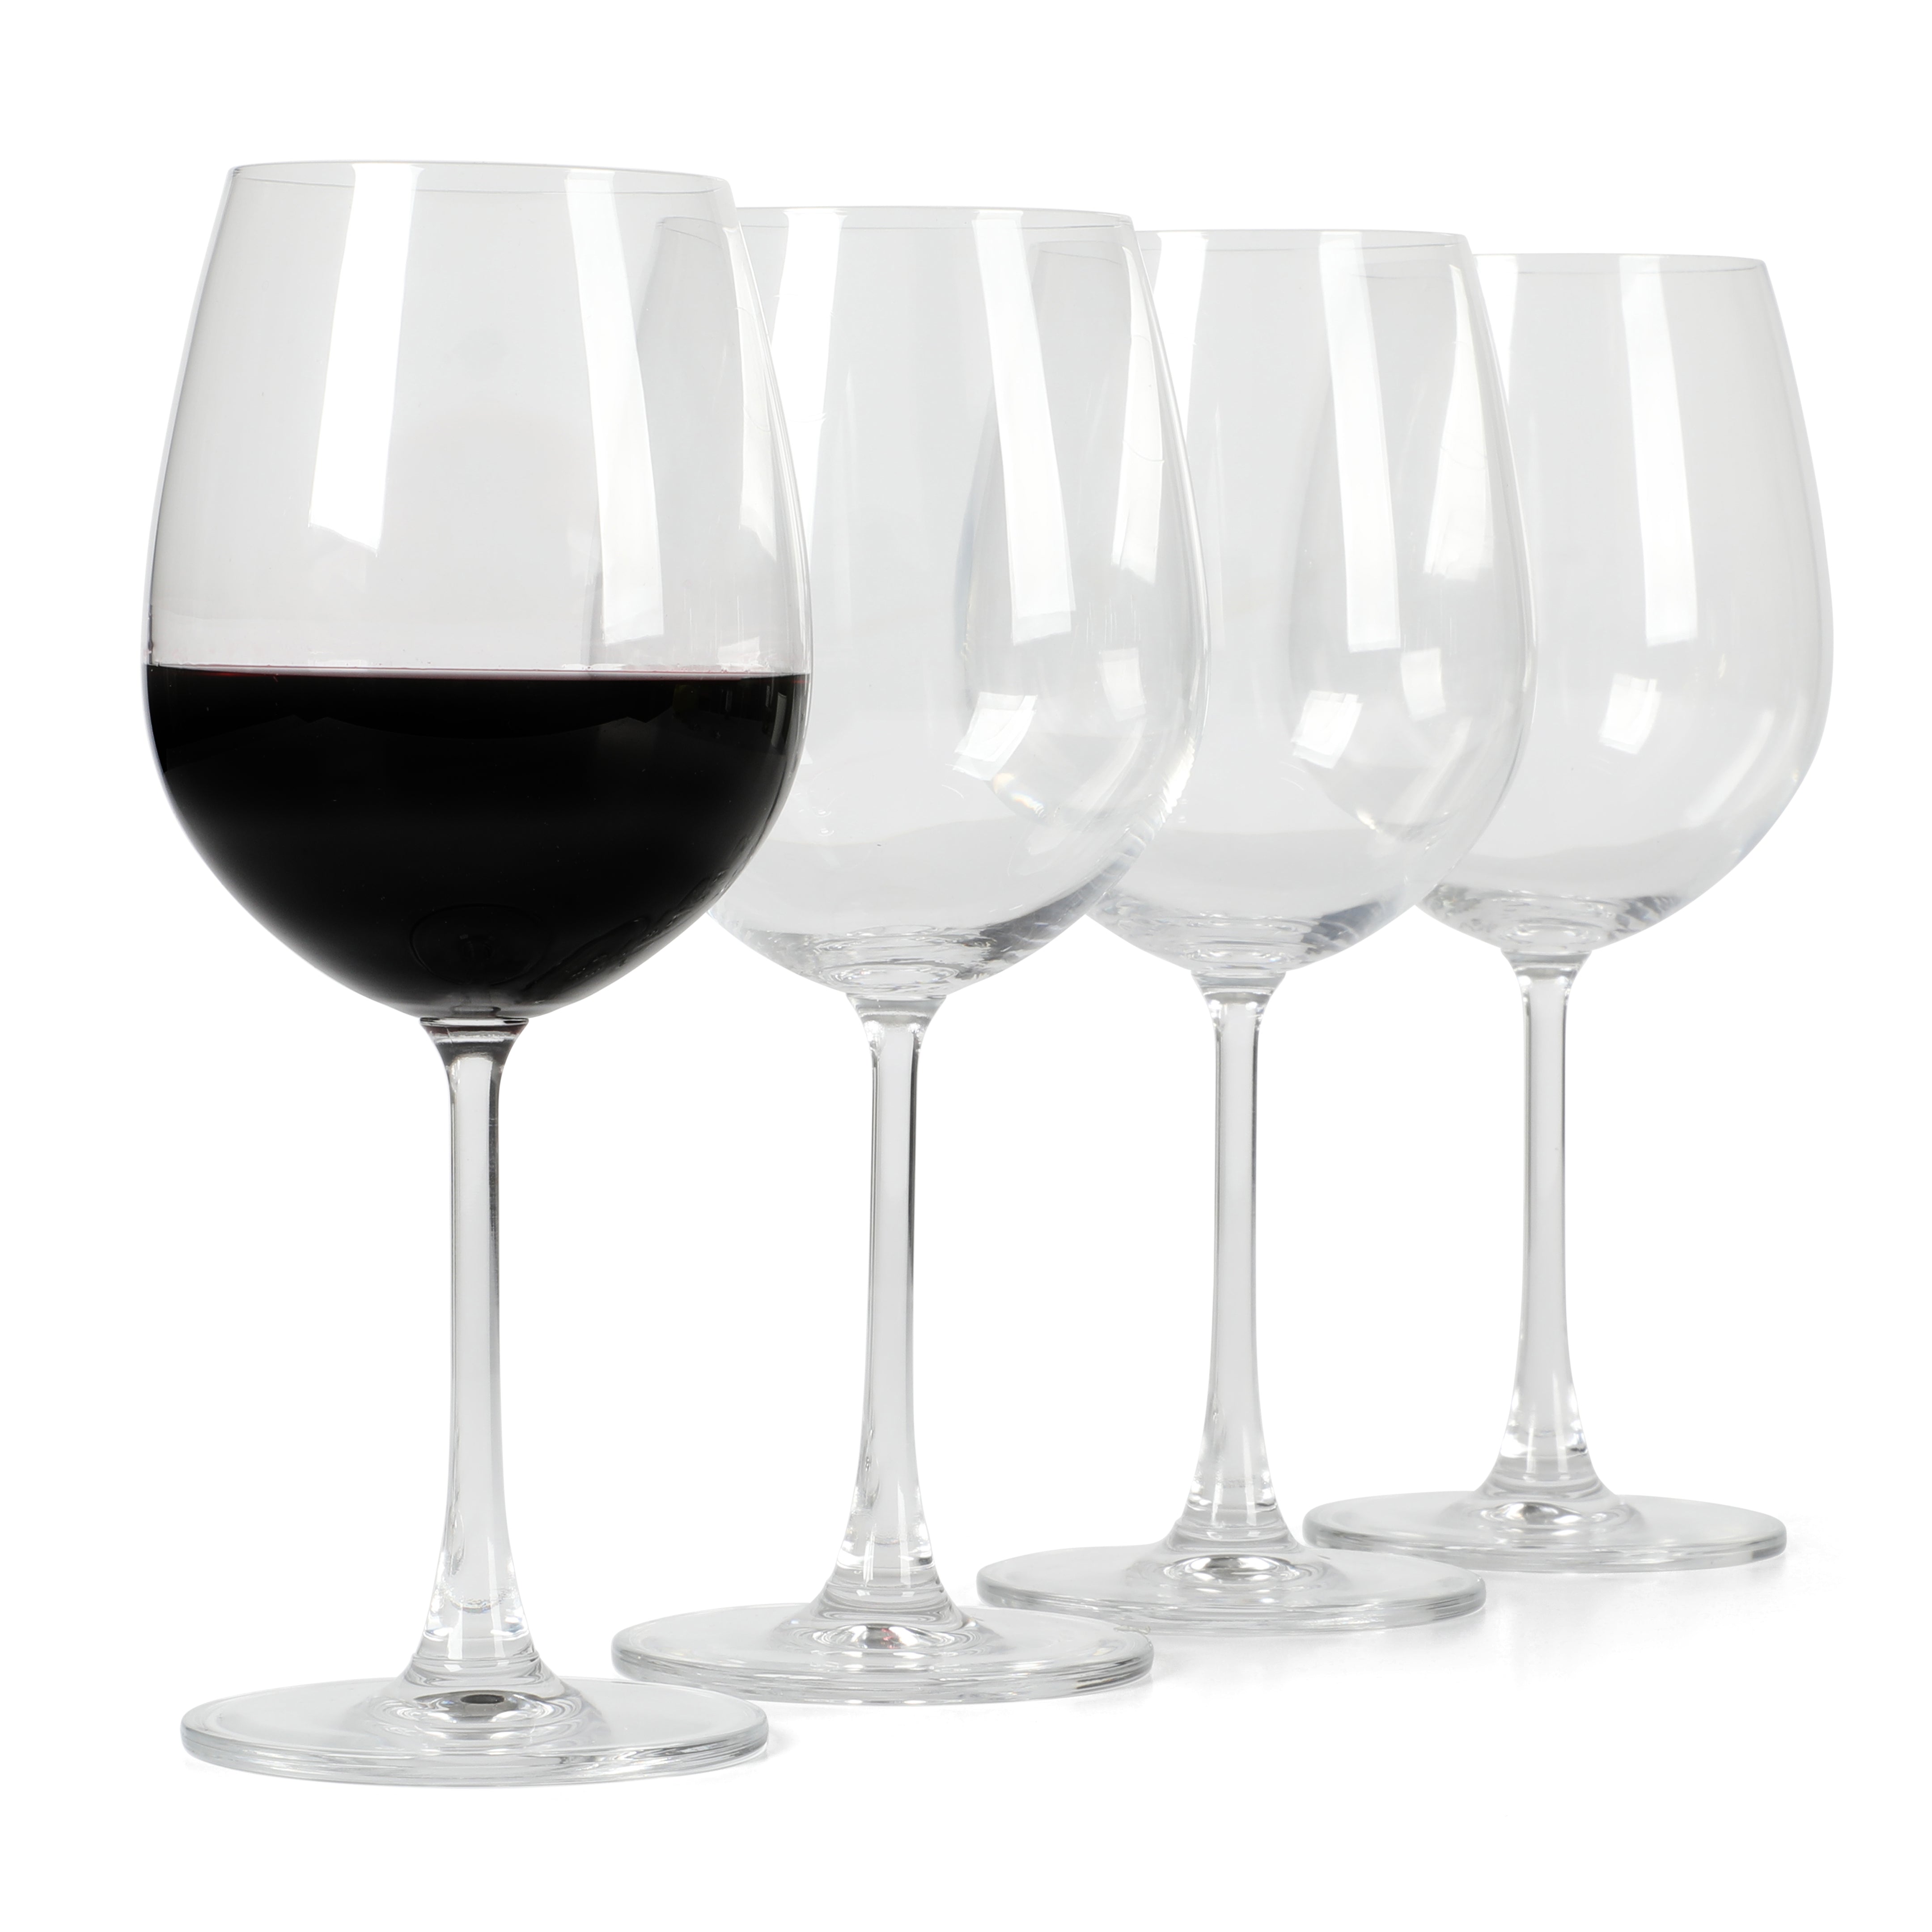 Wine Glasses - Red Wine Glasses Set of 4 Hand Blown Crystal Wine